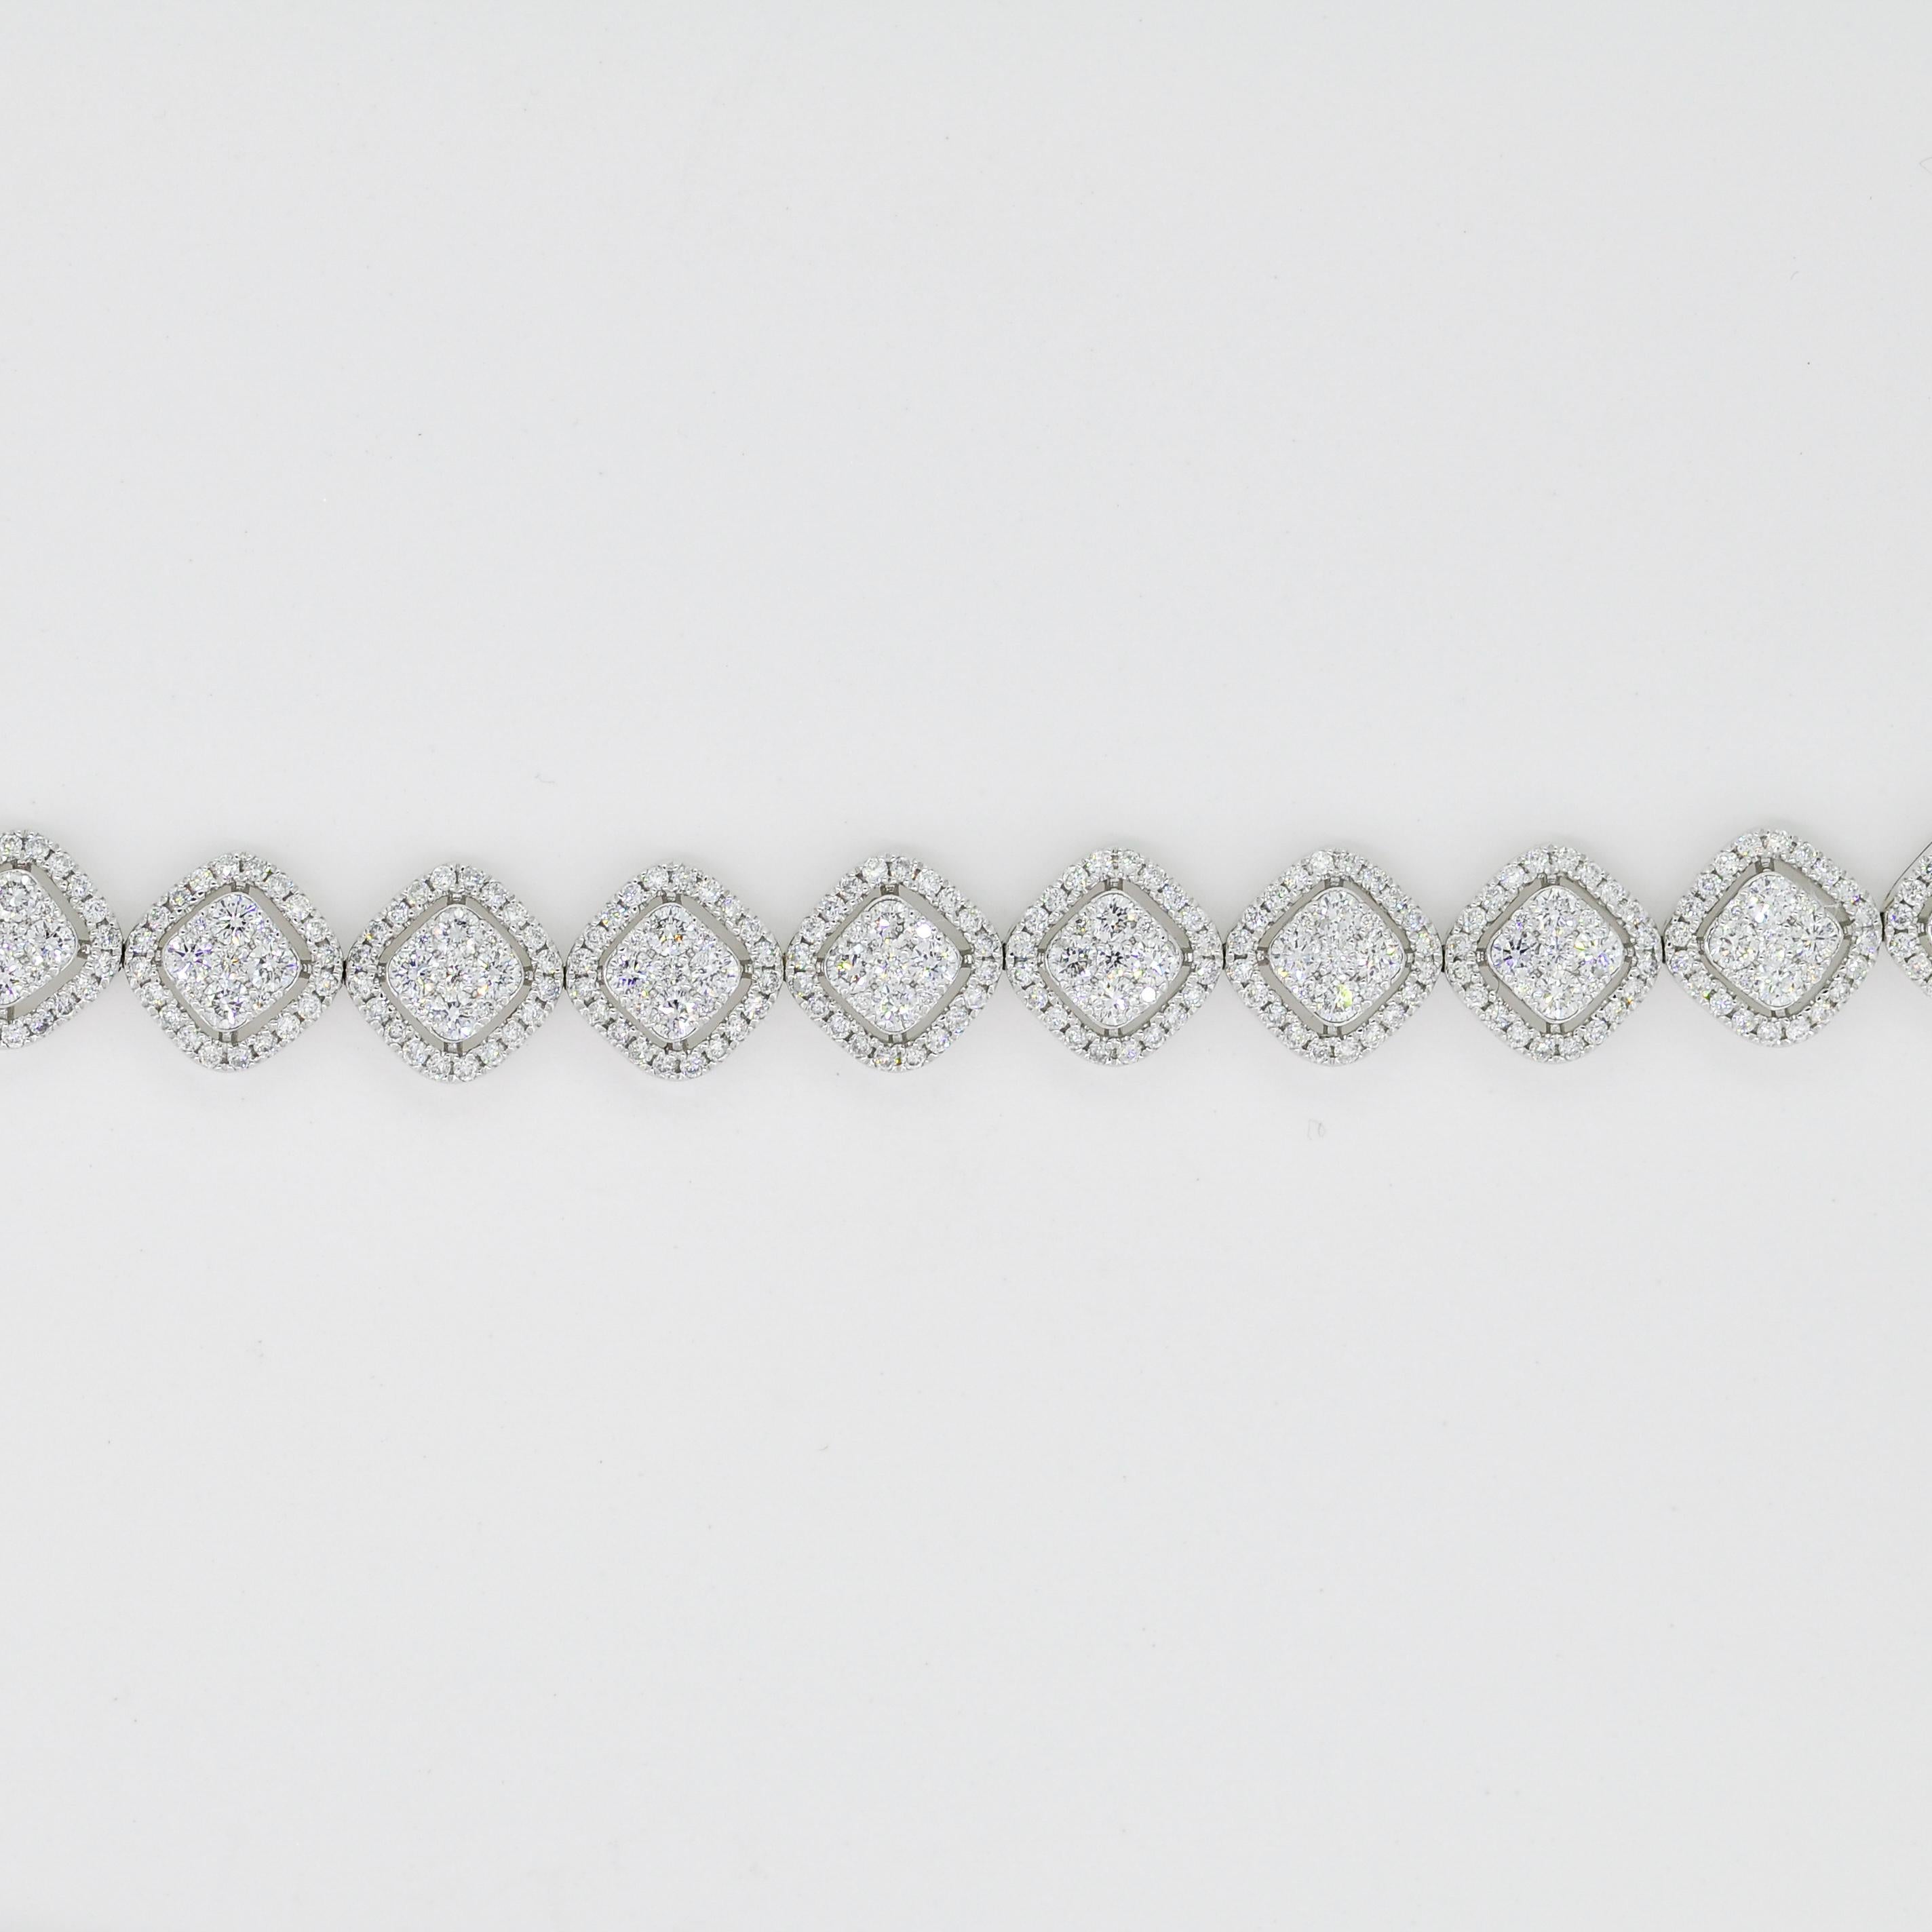 Experience the captivating allure of this modern 18K white gold bracelet with a cluster halo style. Meticulously crafted, it embodies elegance and sophistication. A mesmerizing array of natural diamonds takes center stage, arranged in a cluster